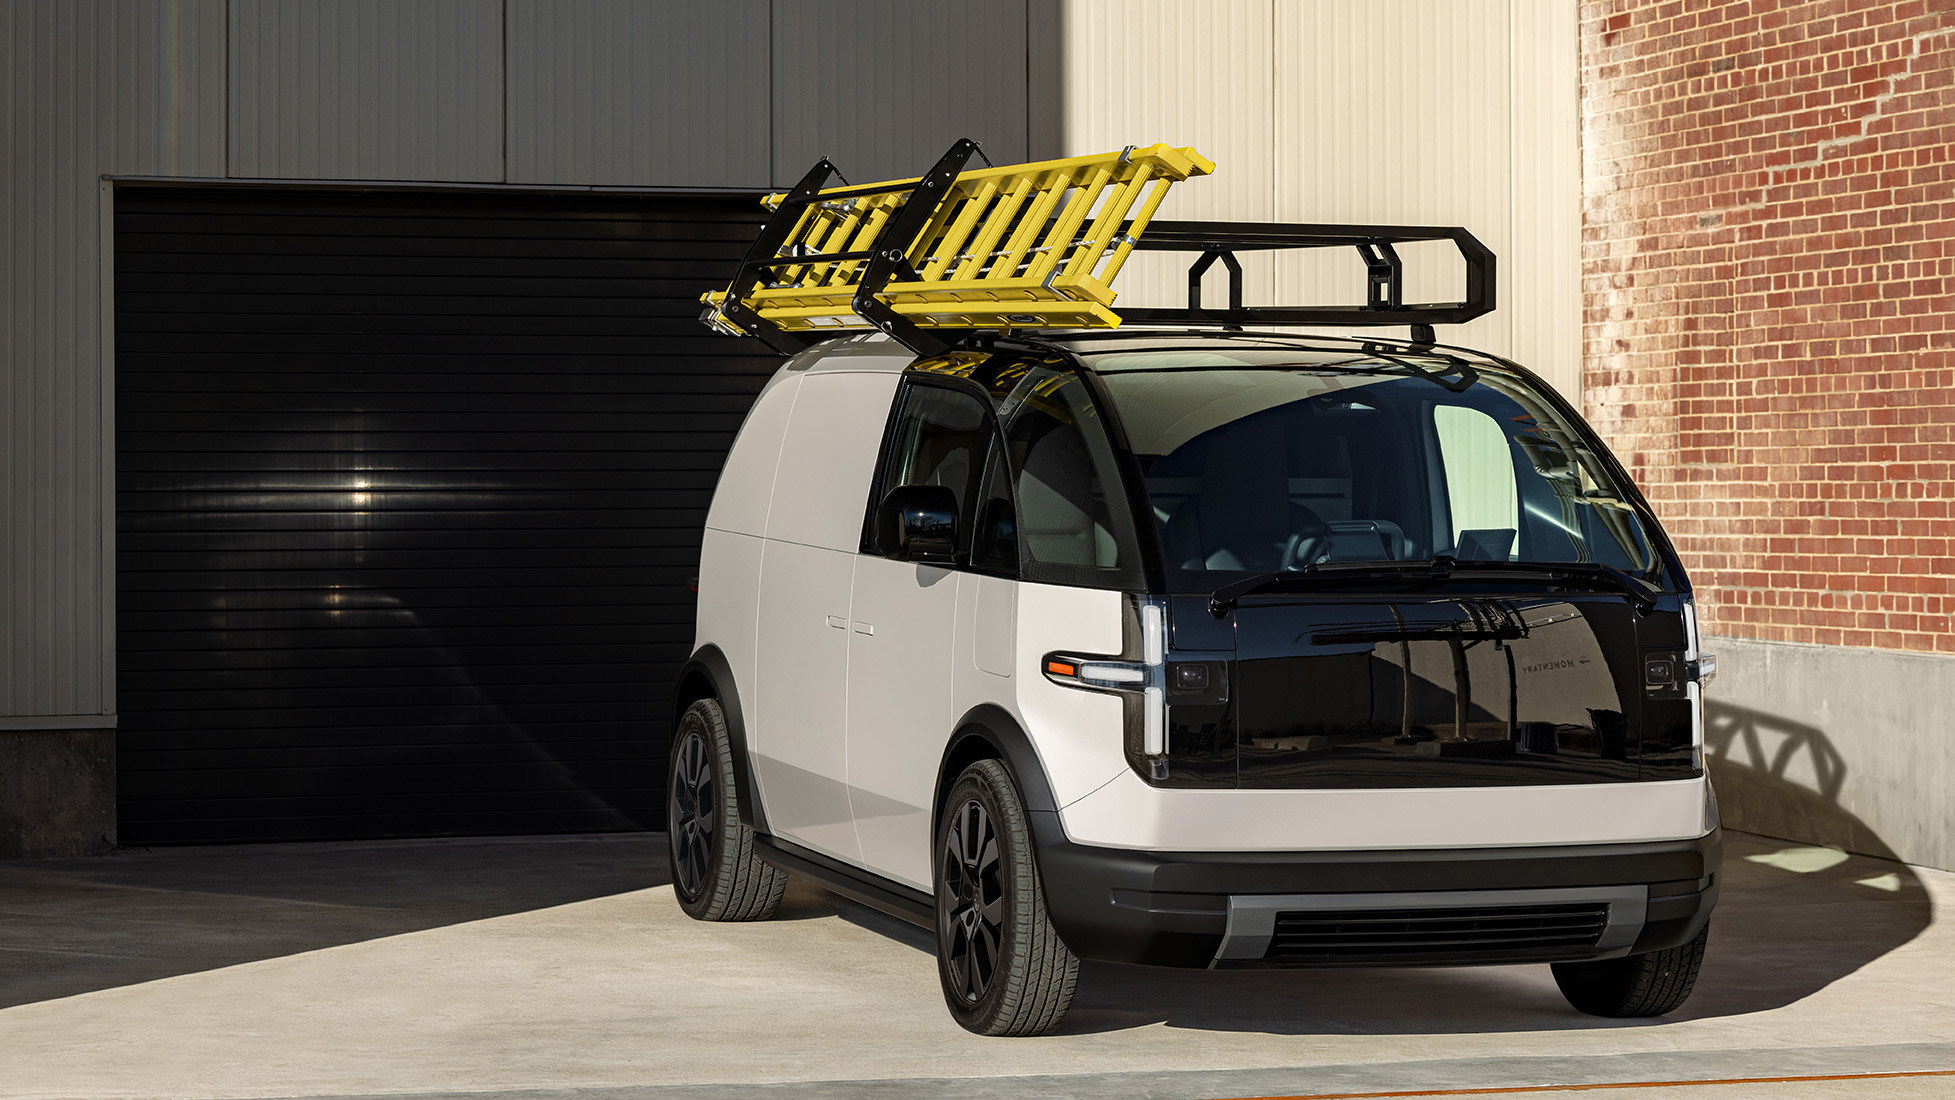 https://e-vehicleinfo.com/global/kingbee-places-binding-order-for-9300-canoo-electric-vehicles/